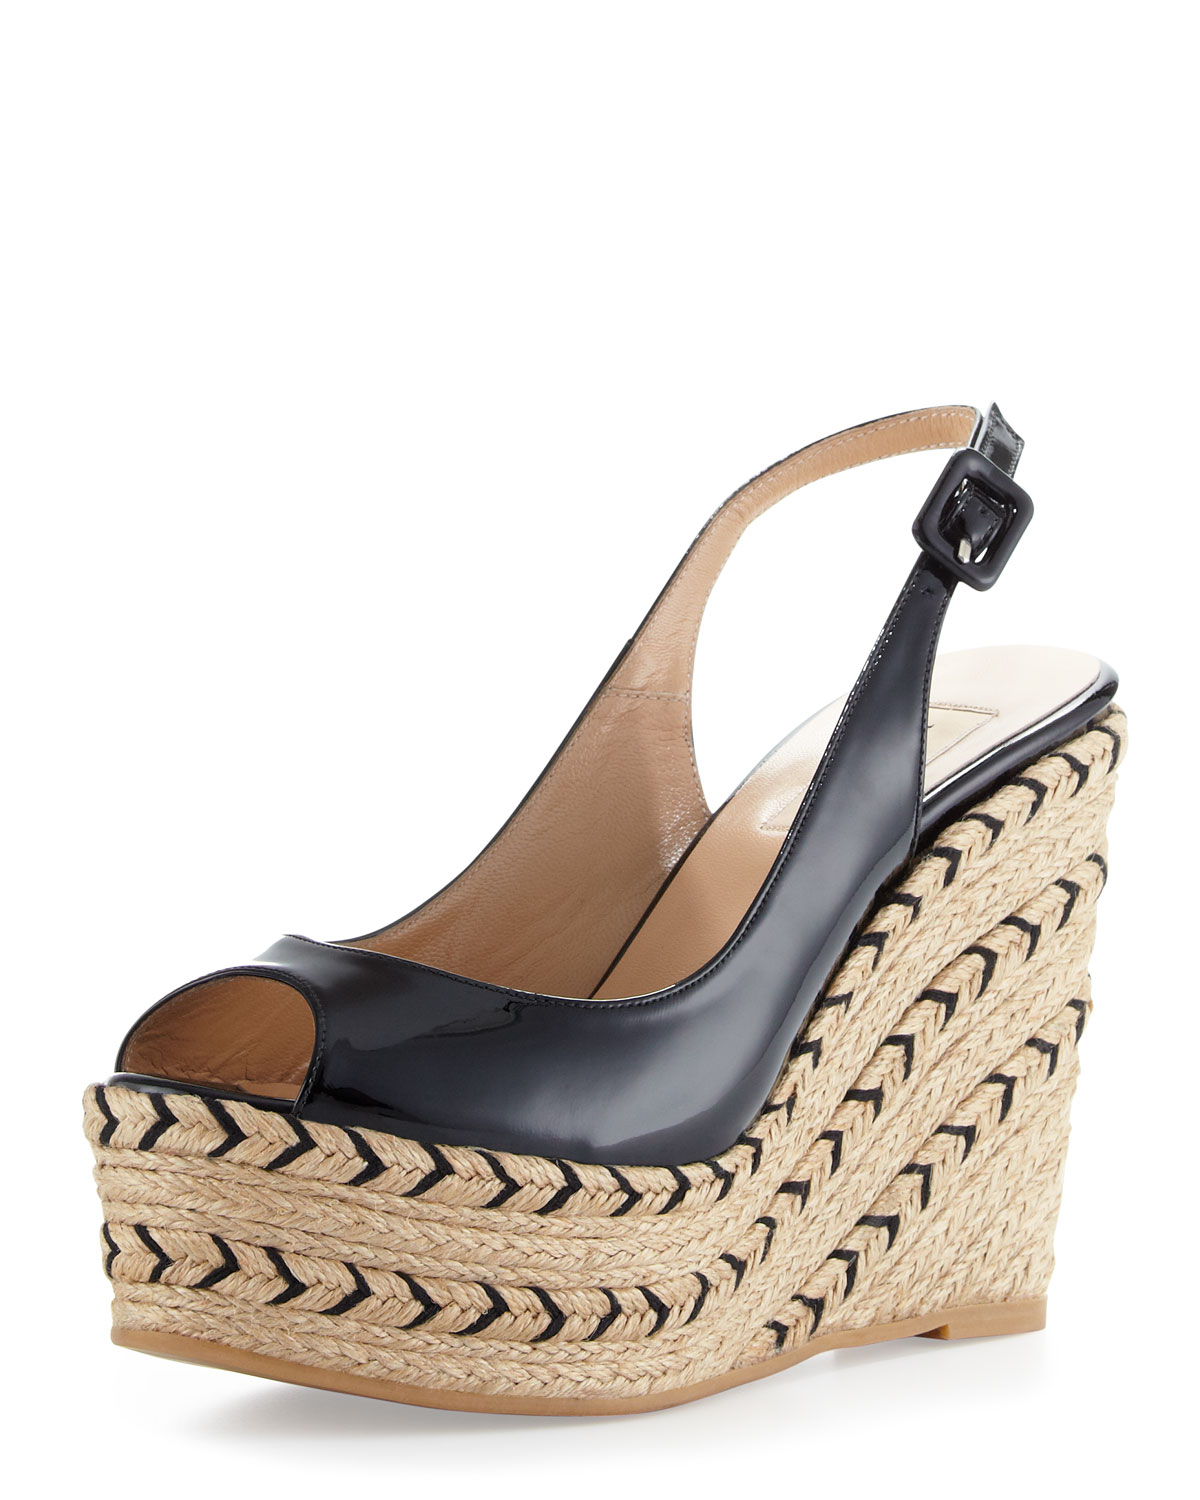 Valentino Patent Slingback Espadrille Wedge in Black - Lyst